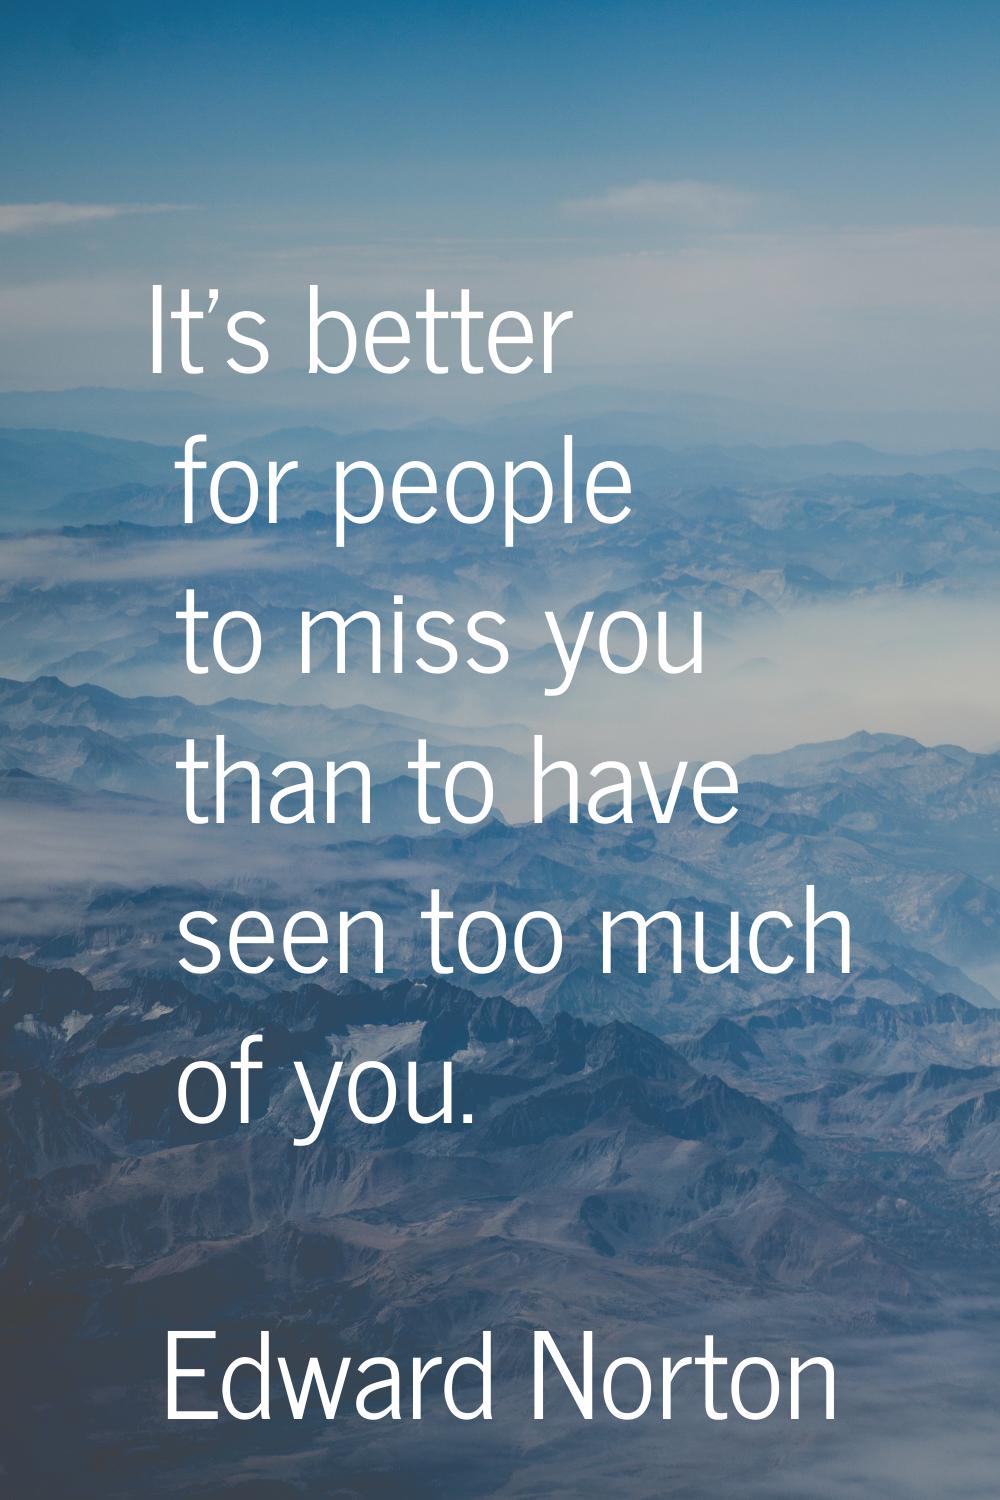 It's better for people to miss you than to have seen too much of you.